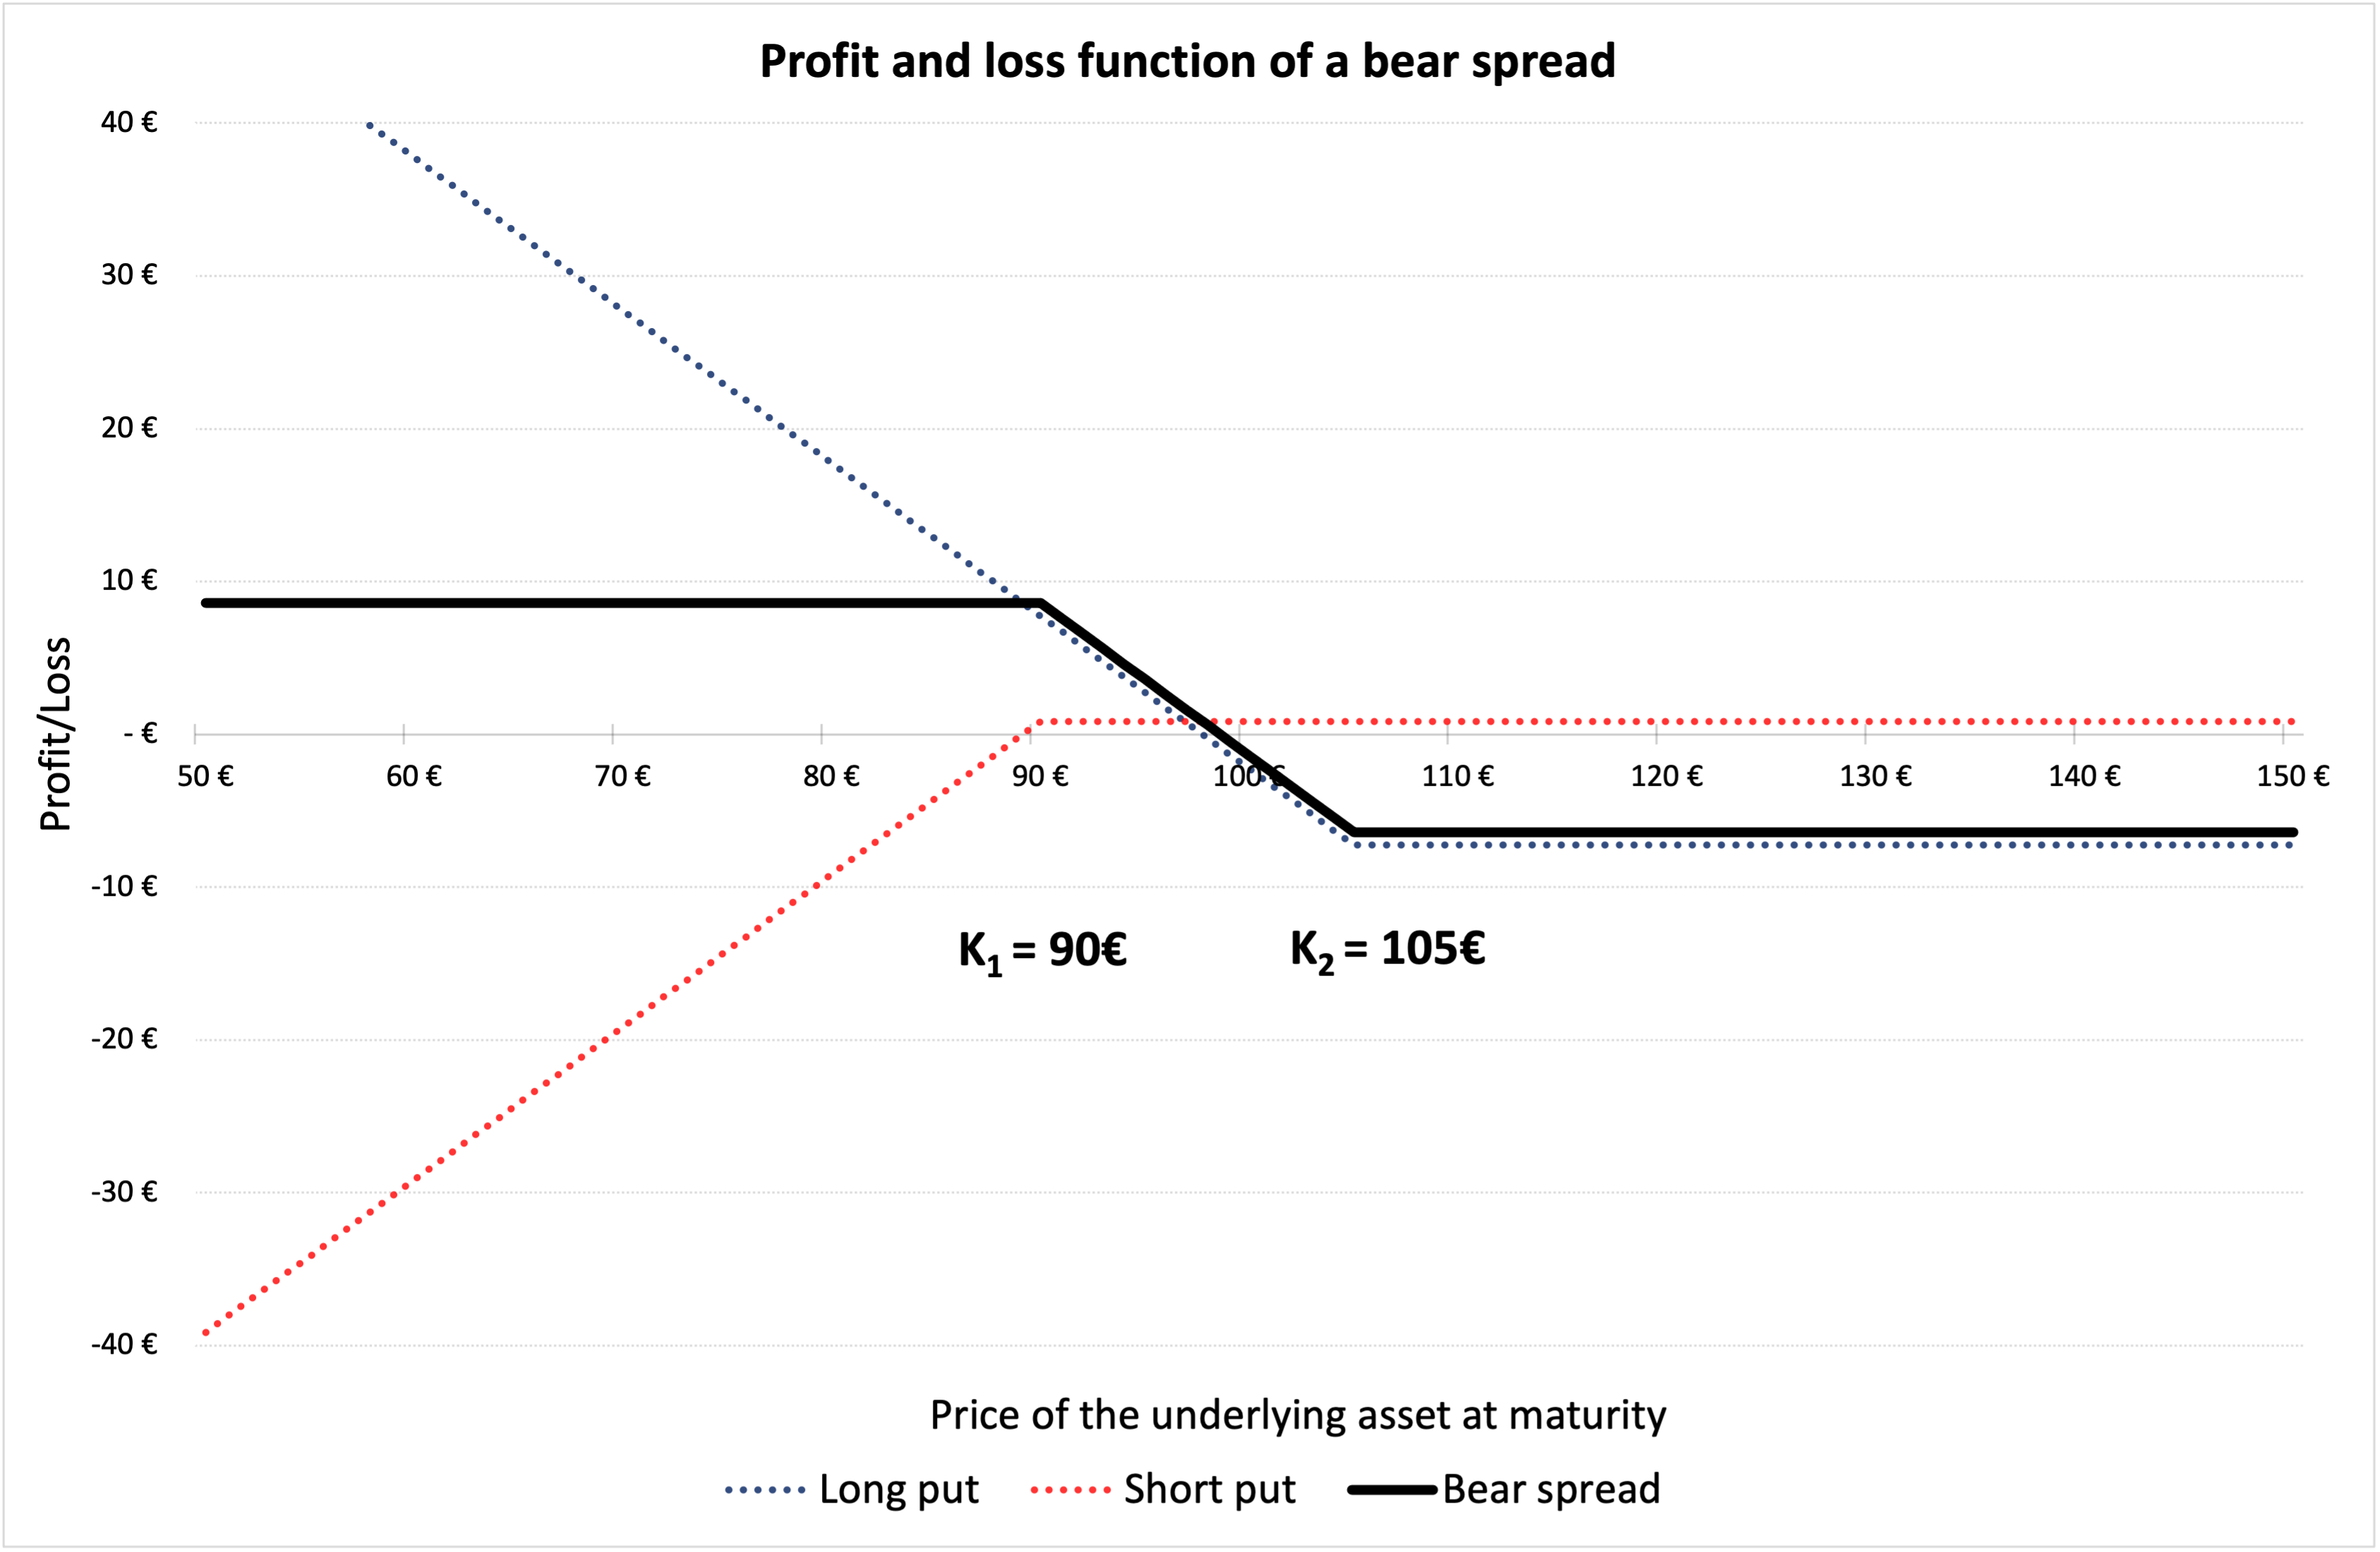  Profit and loss (P&L) function of a bear spread 